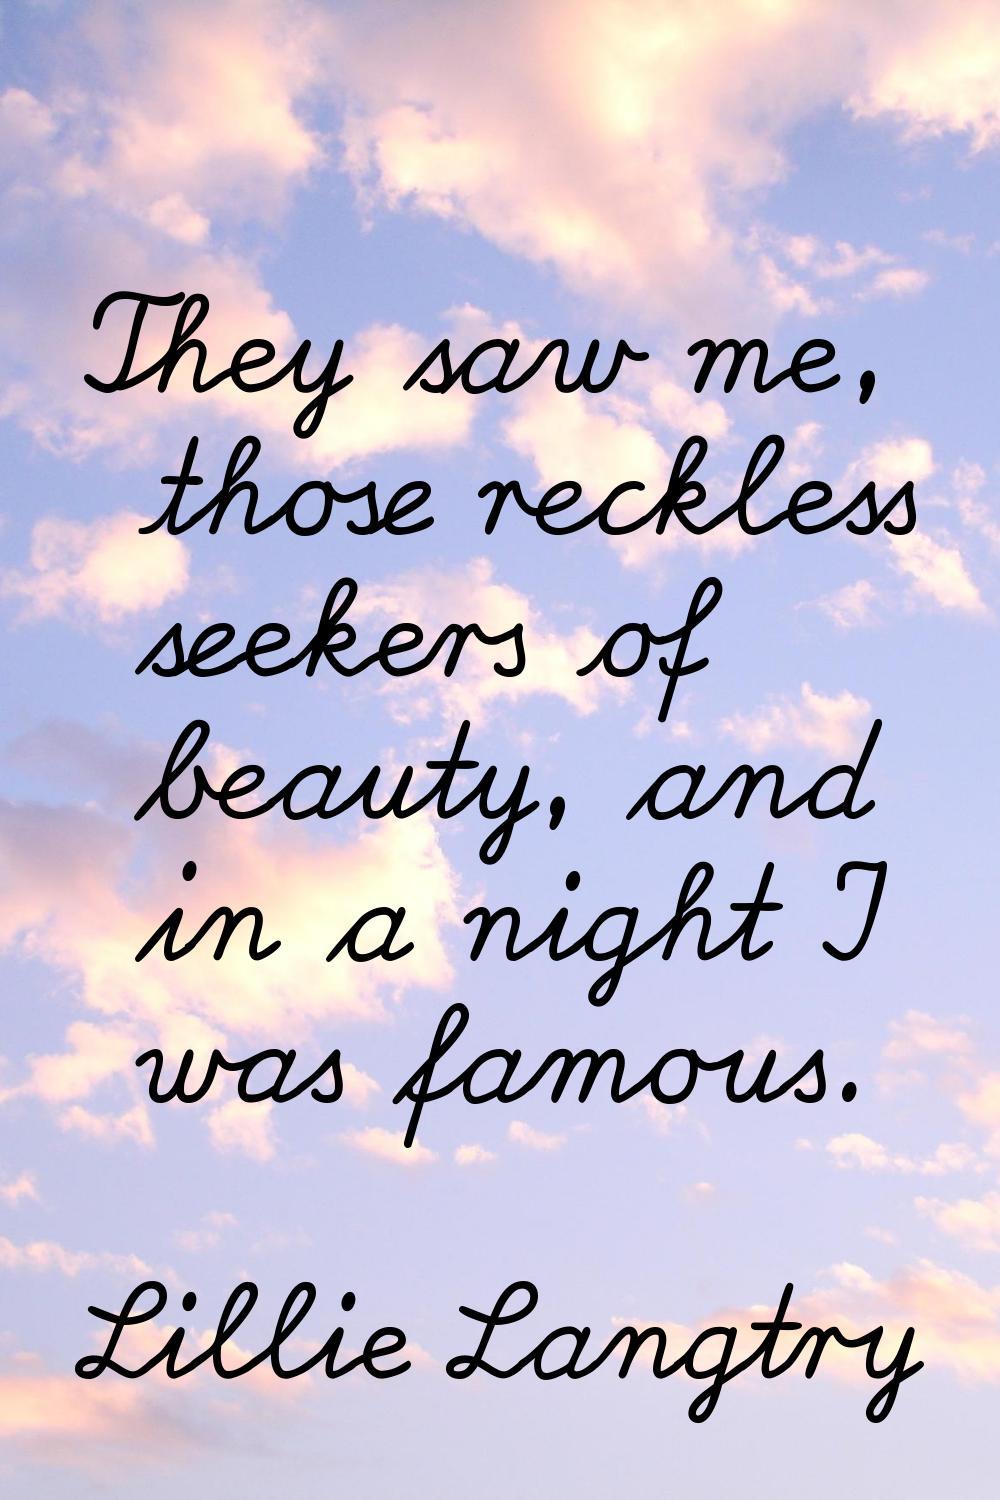 They saw me, those reckless seekers of beauty, and in a night I was famous.